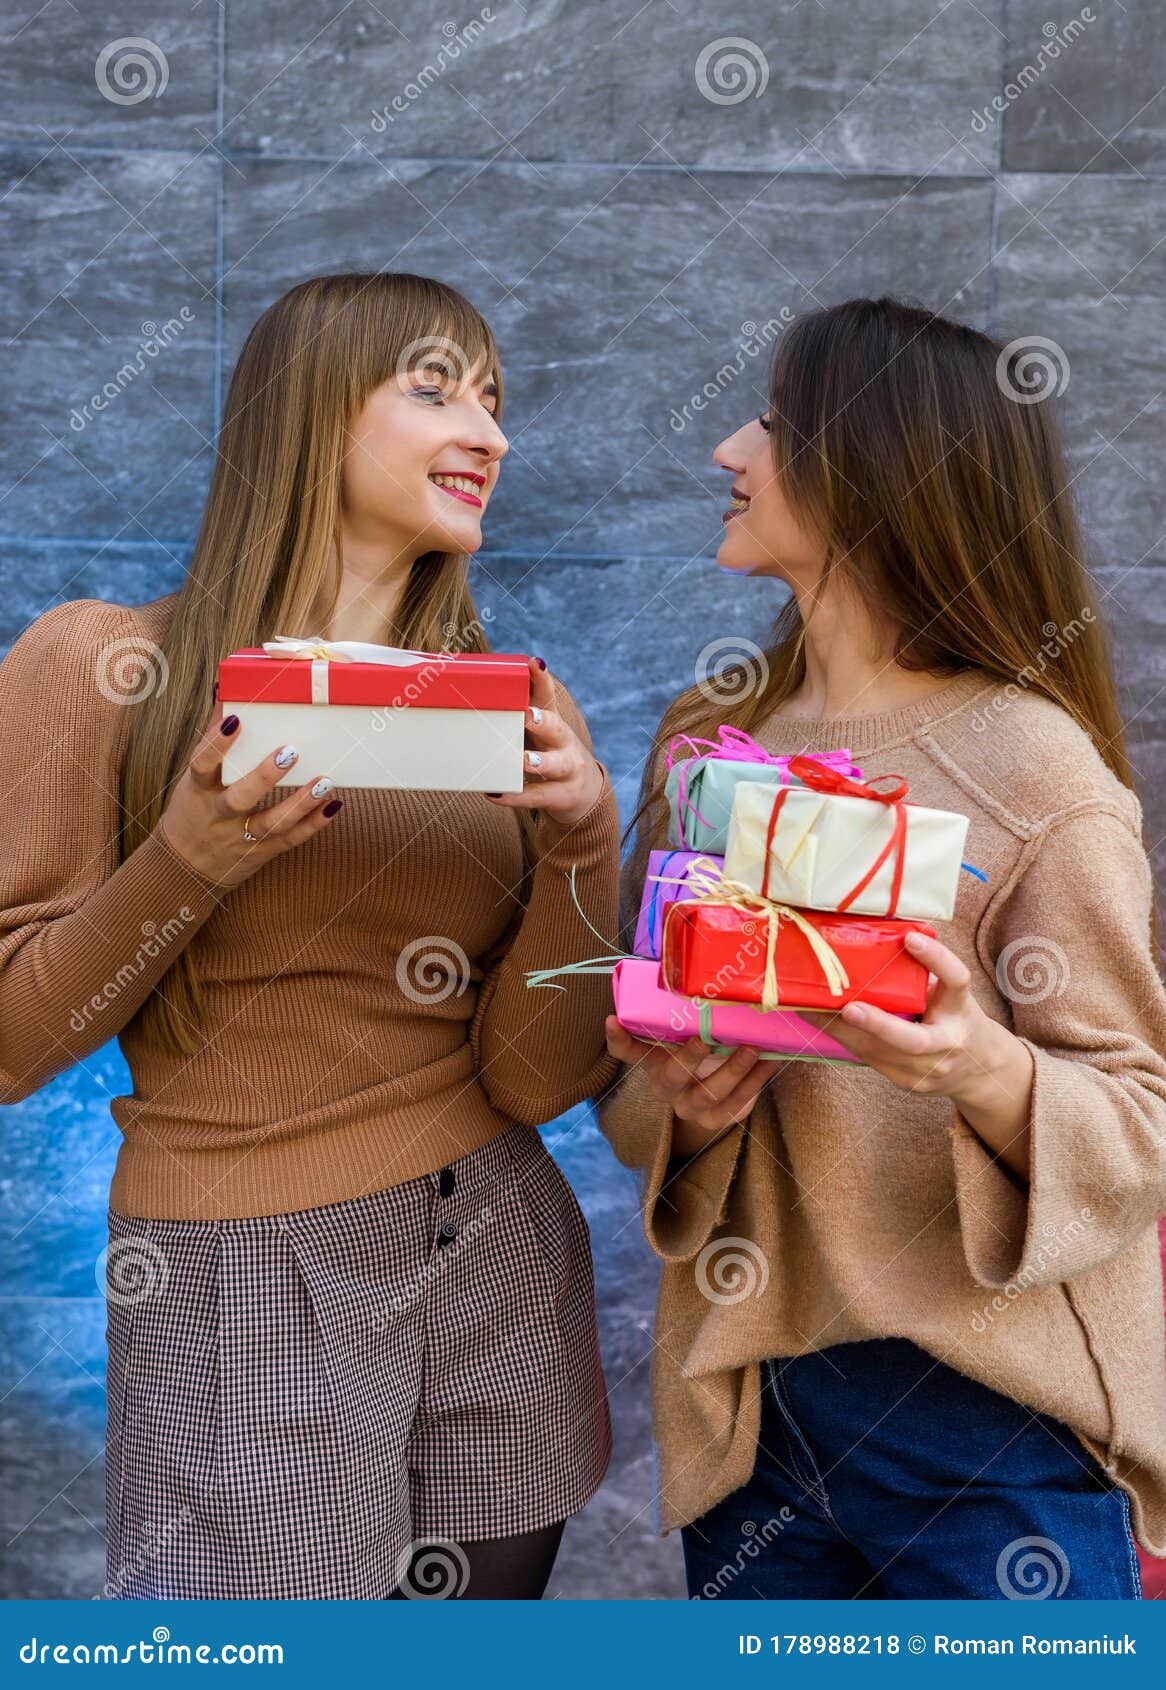 Two Girls Holding Gift Box. Celebration of the New Year or Christmas or ...